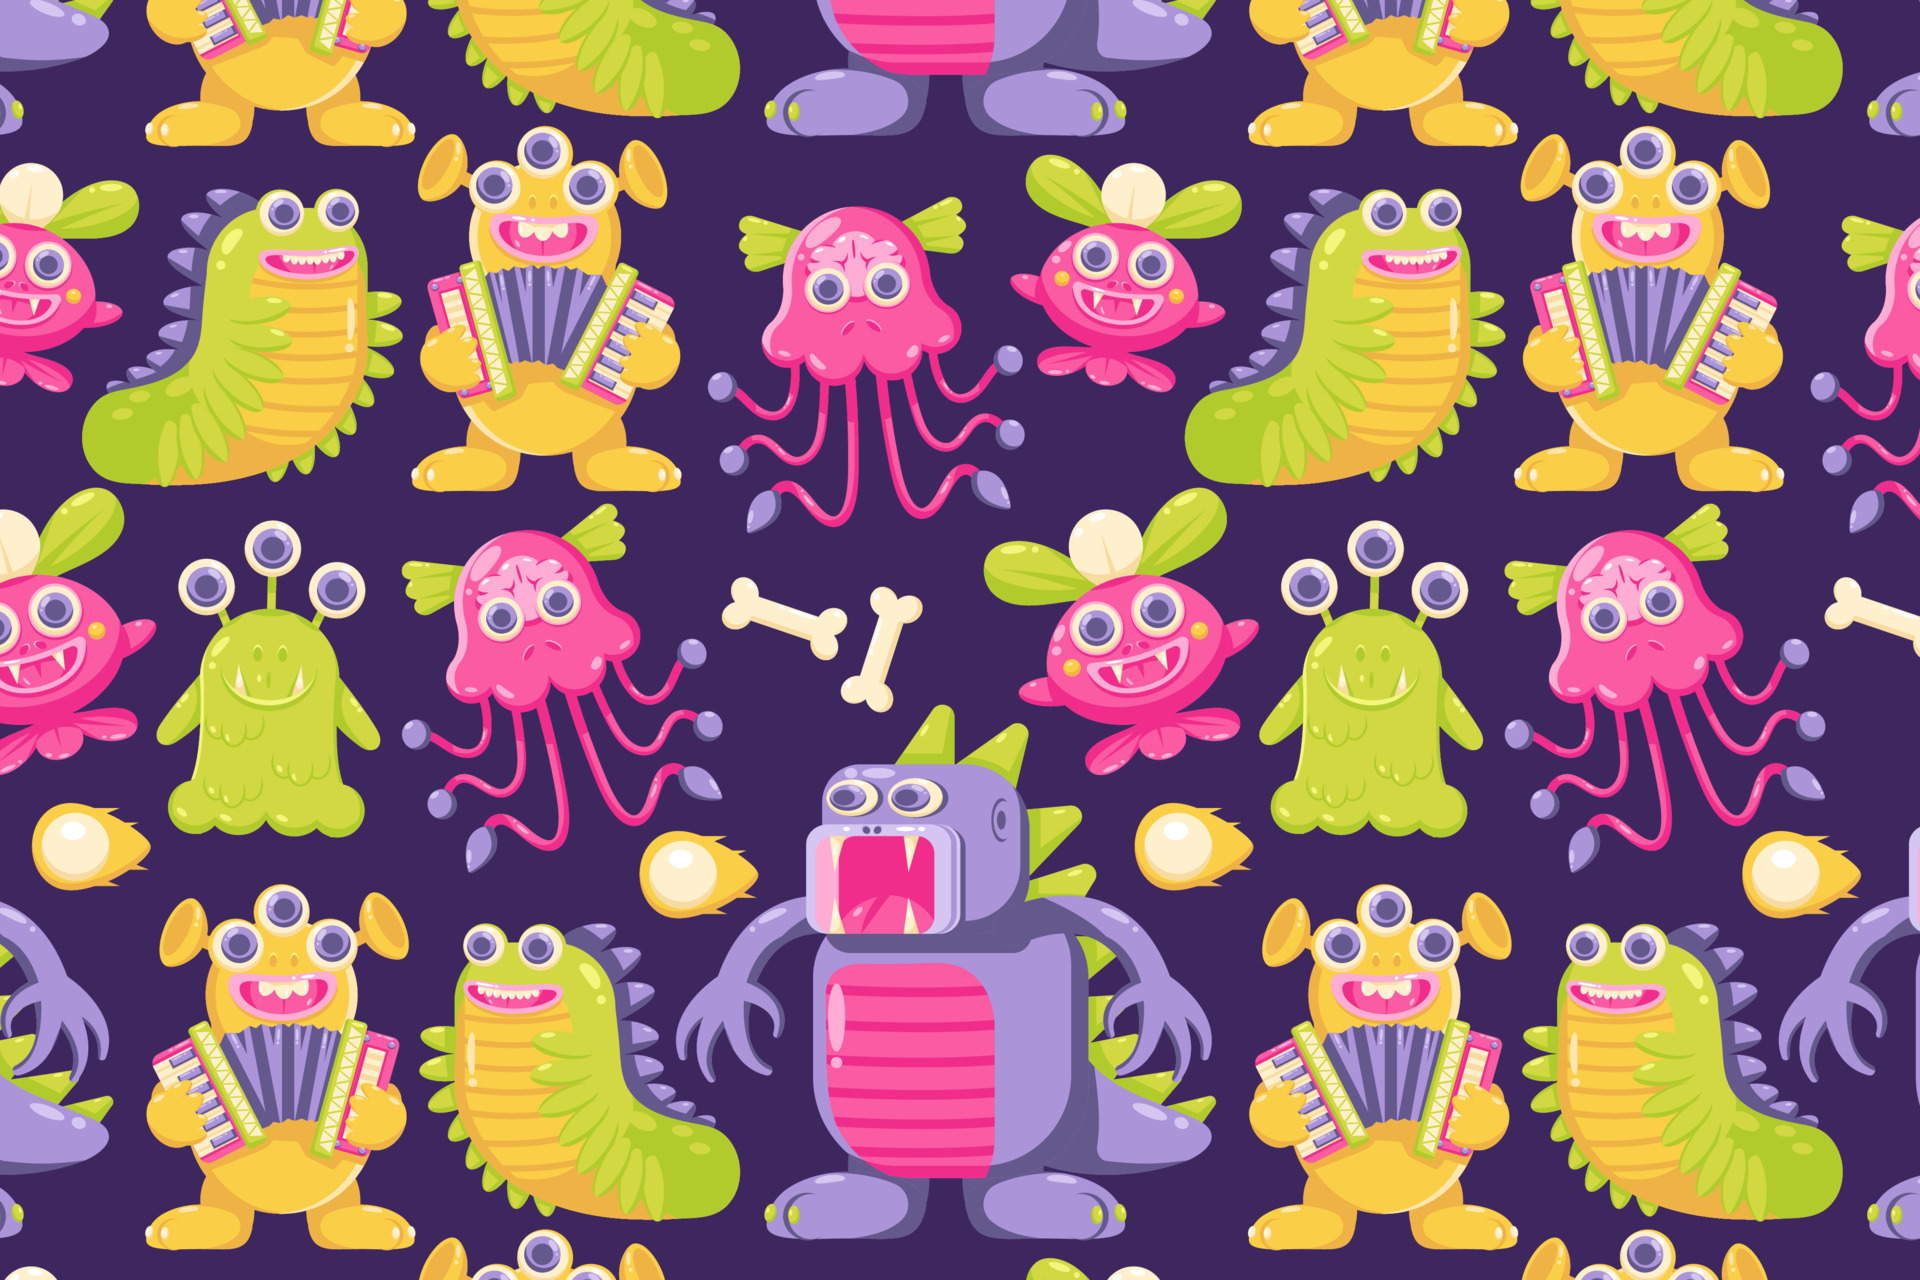 Cute monsters. Caterpillar patterns, crocodiles, playing music and ...